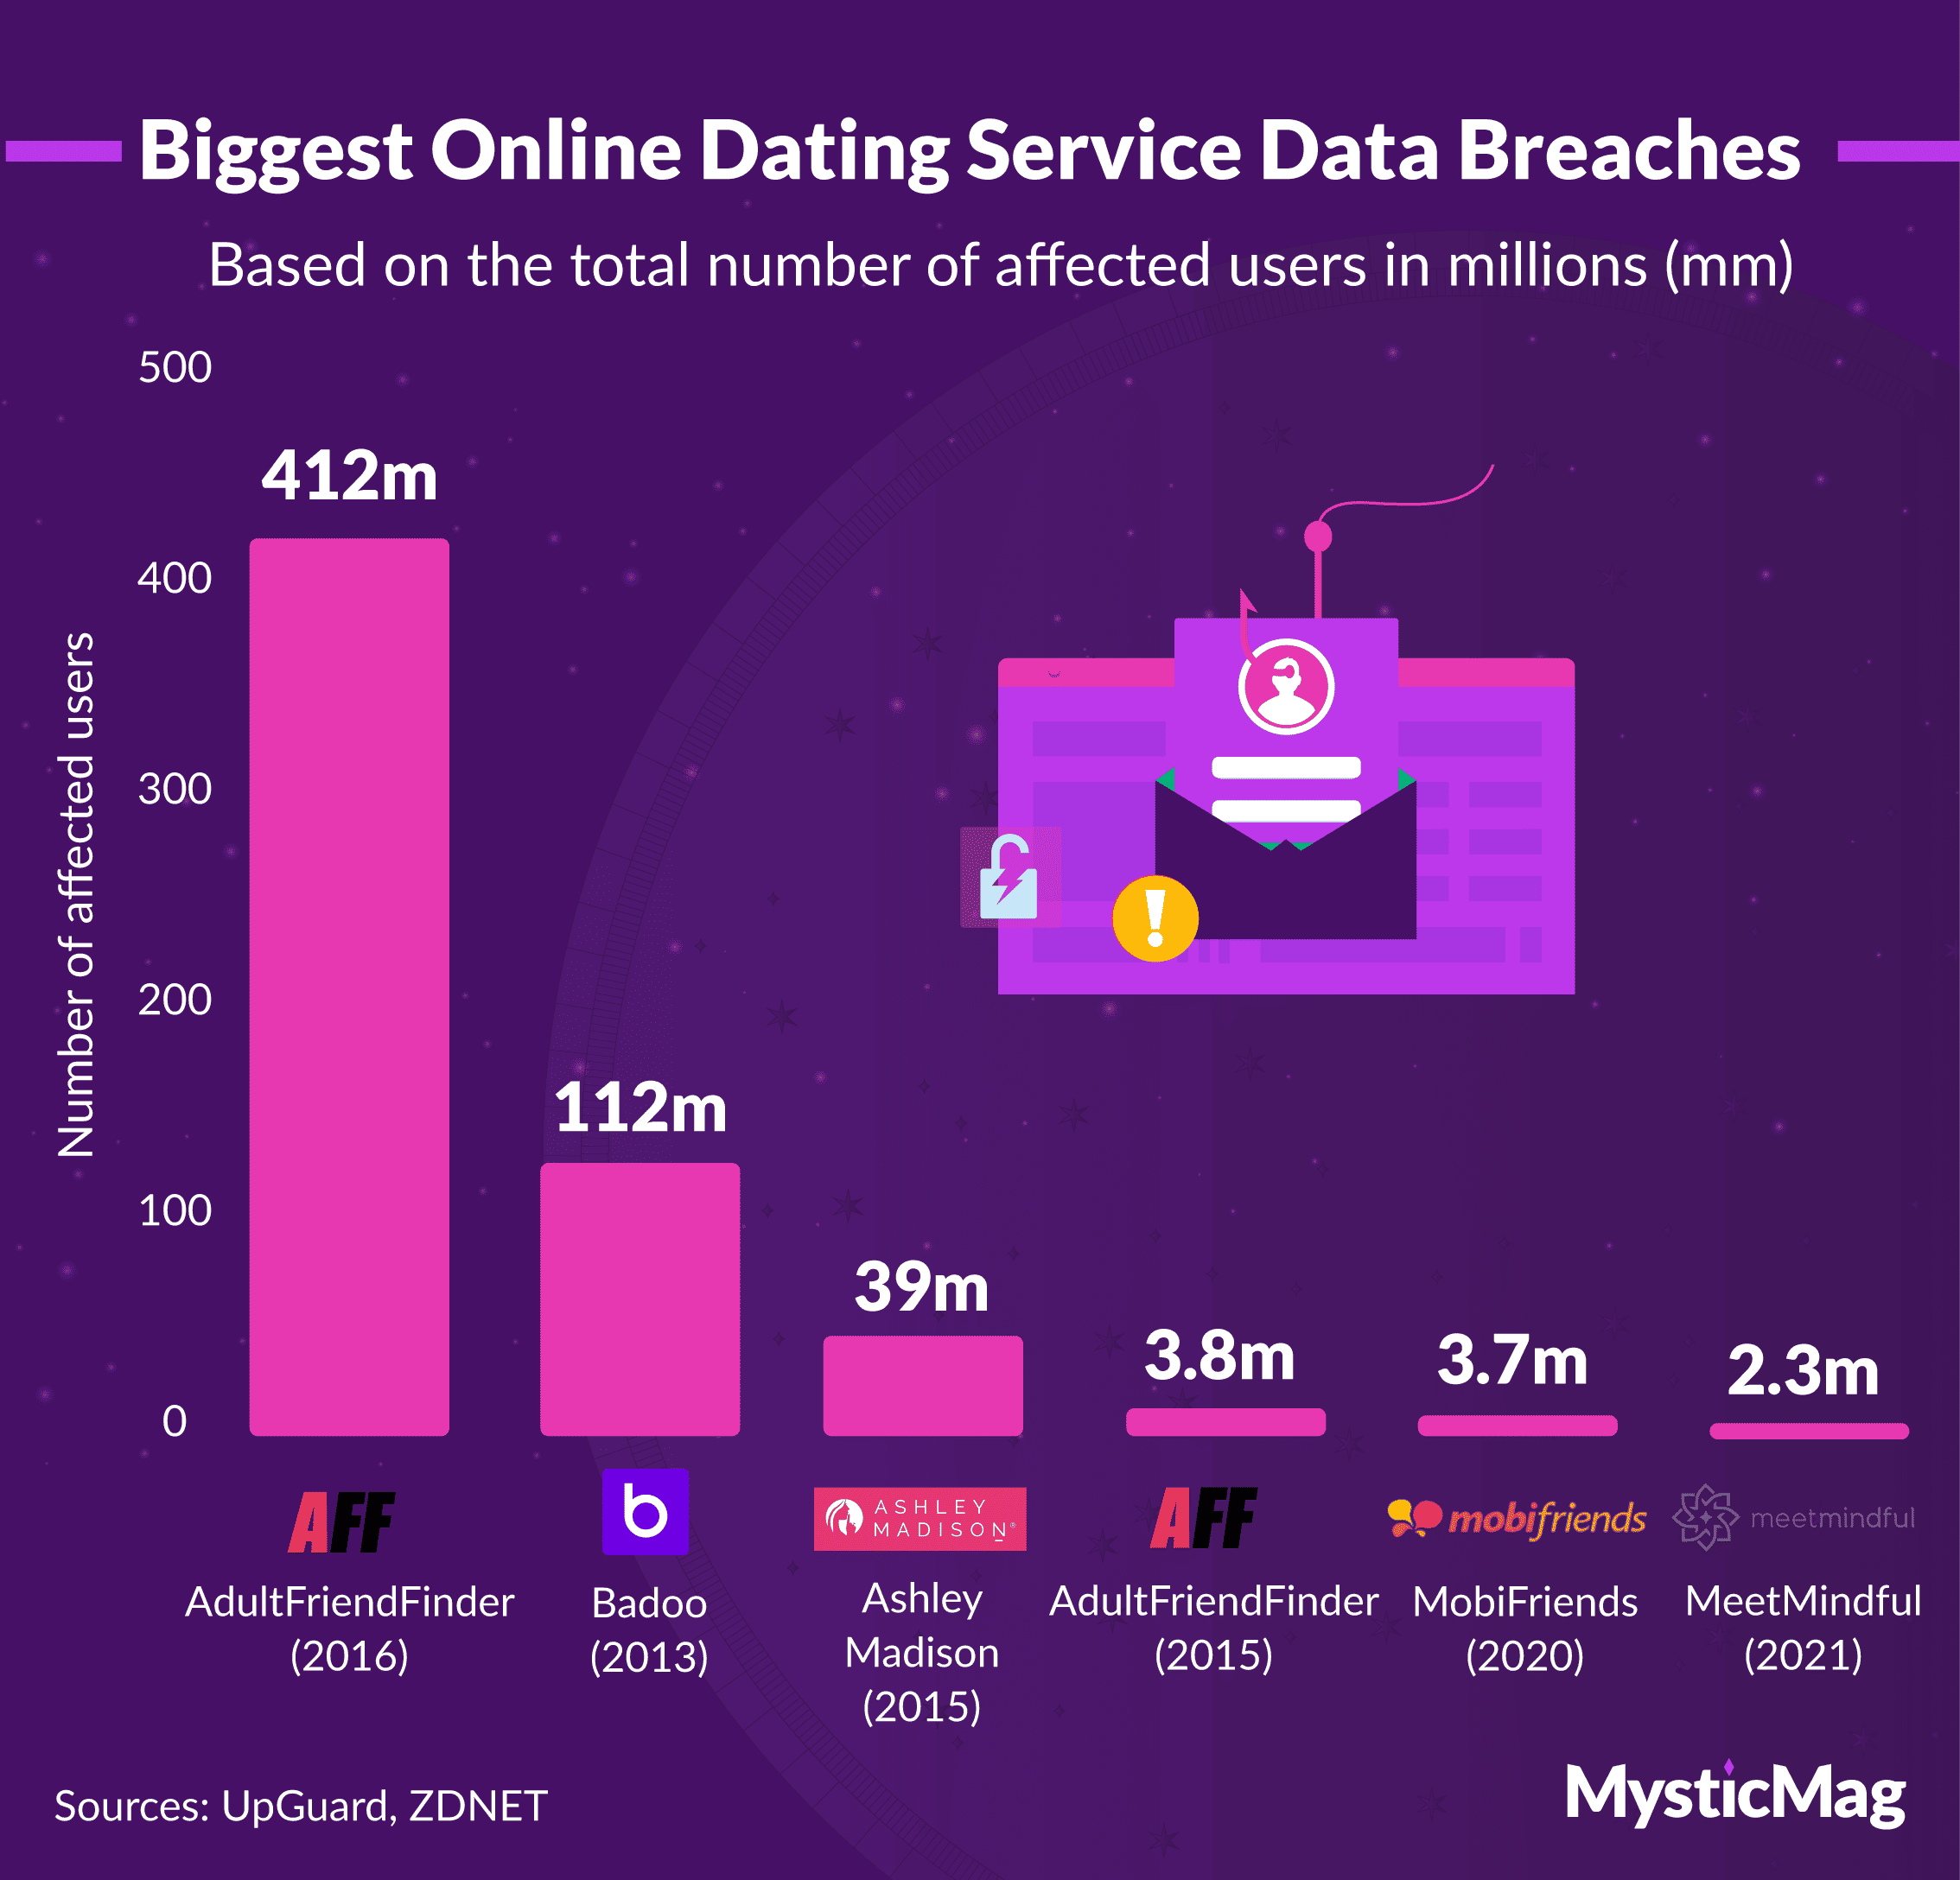 Biggest data breaches among online dating companies